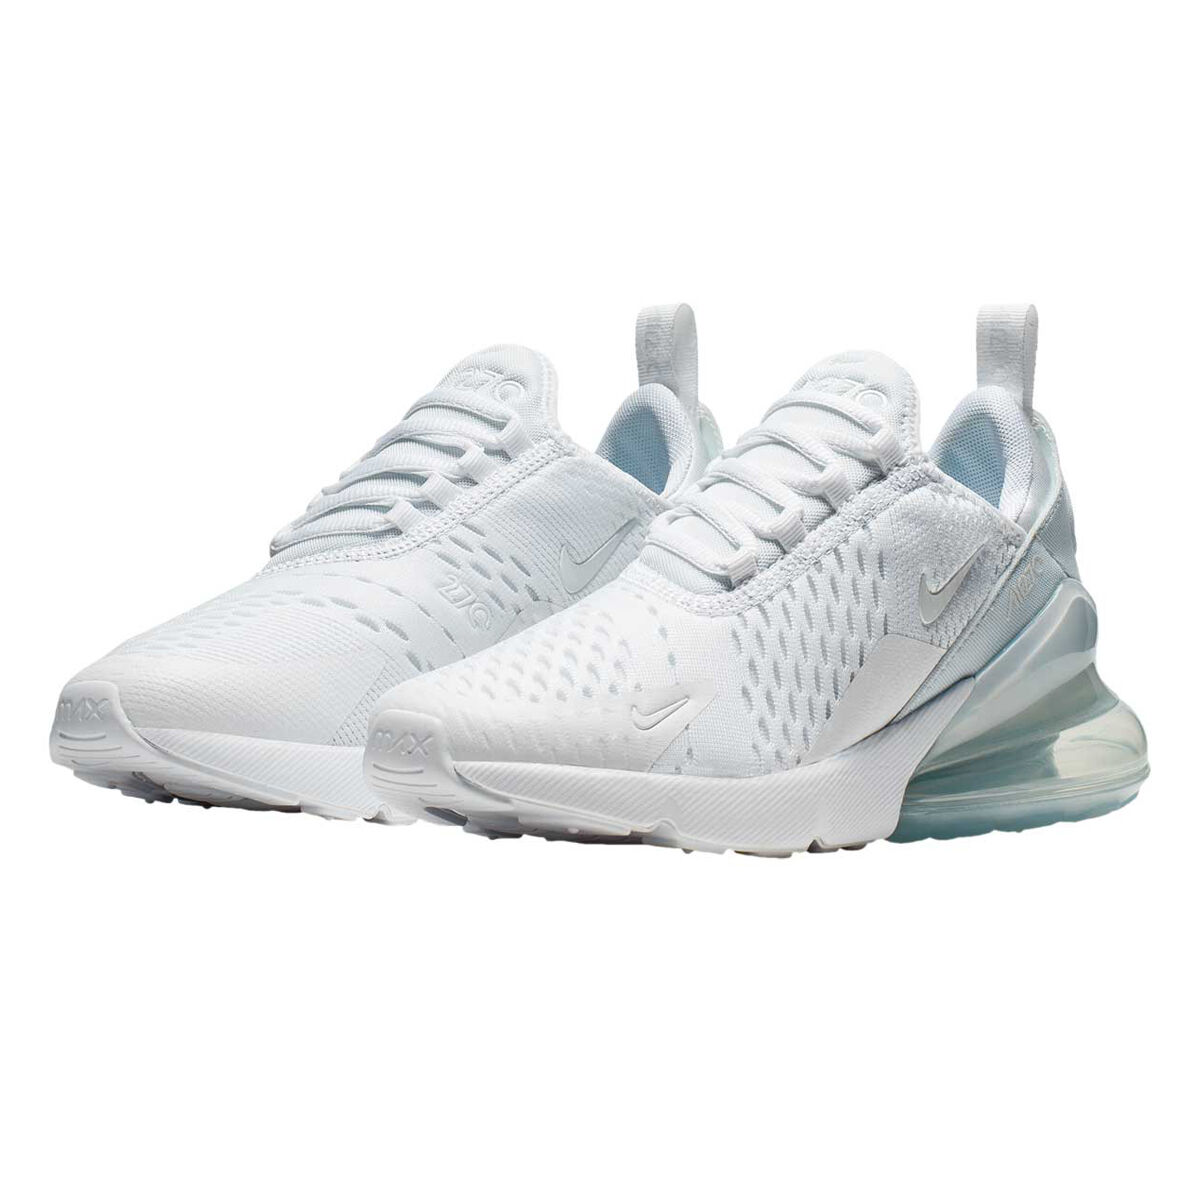 nike air max 270 pictures